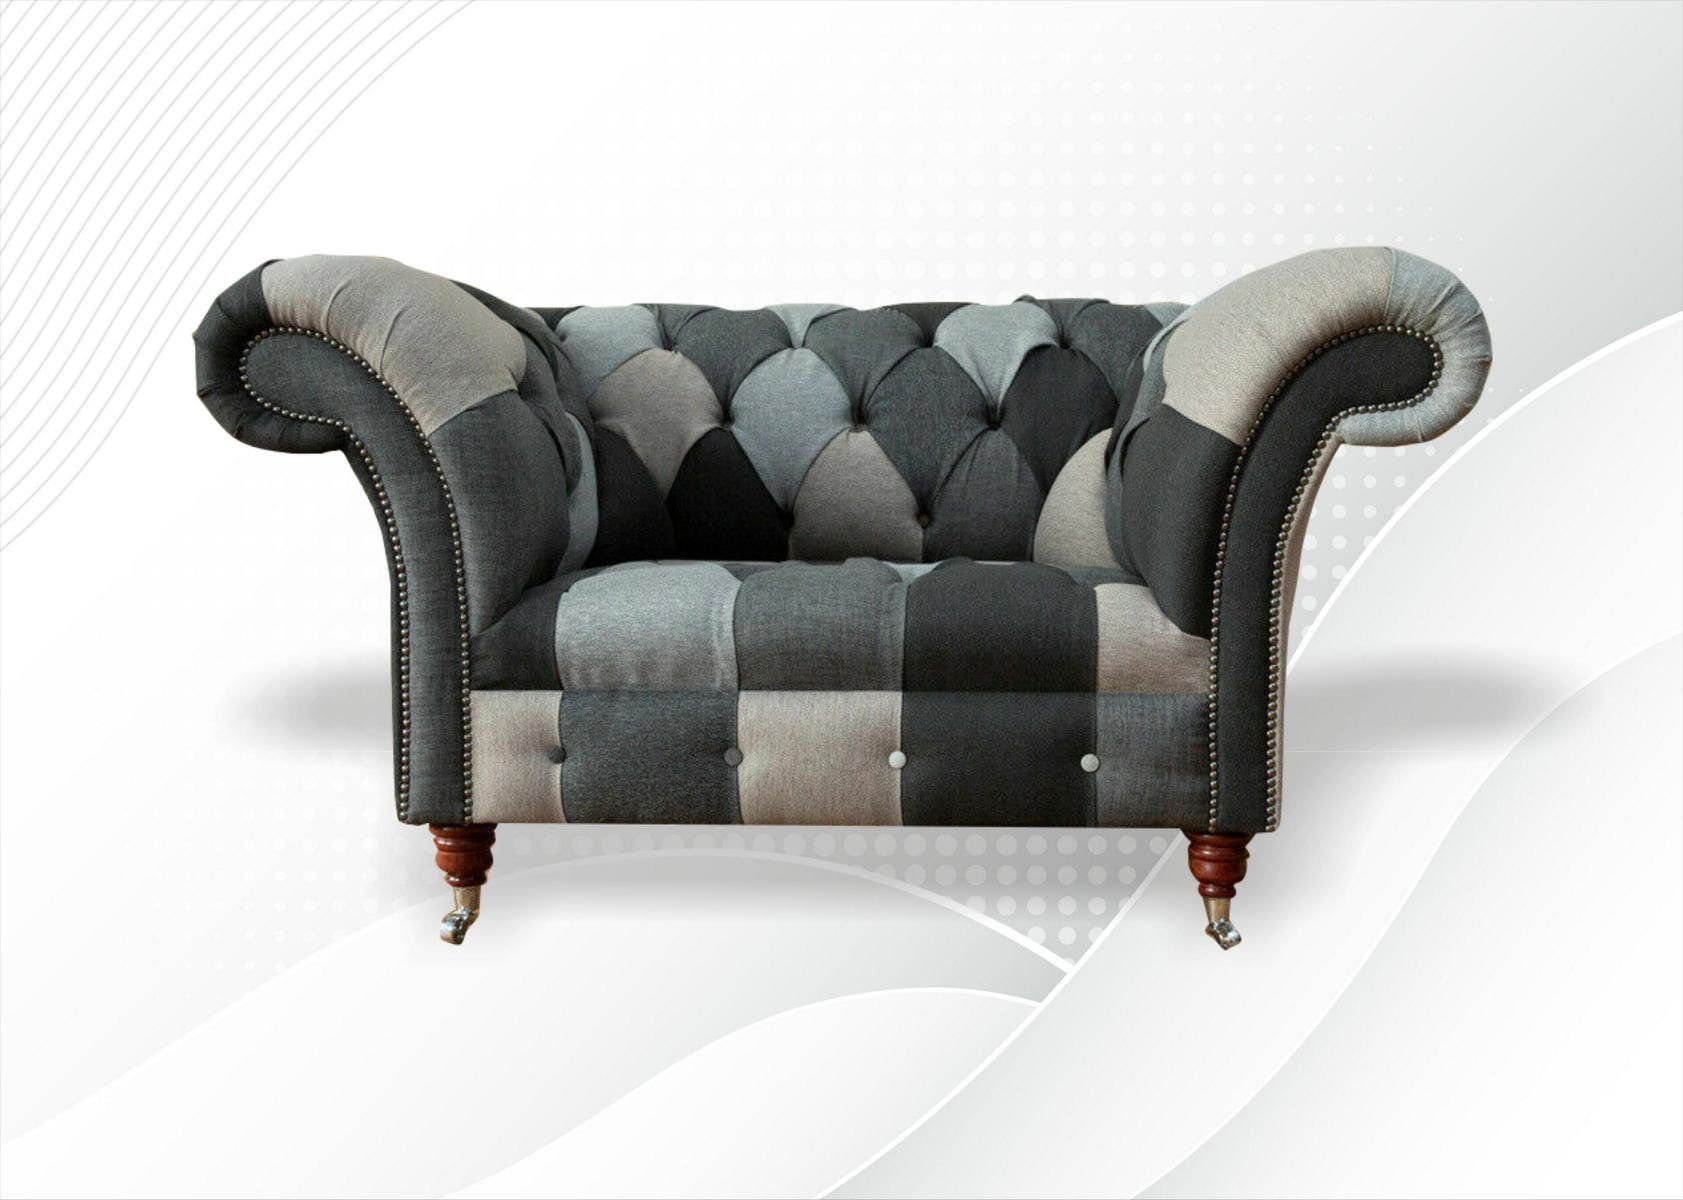 JVmoebel Sofa Designer Chesterfield Stoff Couch Luxus Sessel 1.5 Sitzer Polster Sofa, Made in Europe